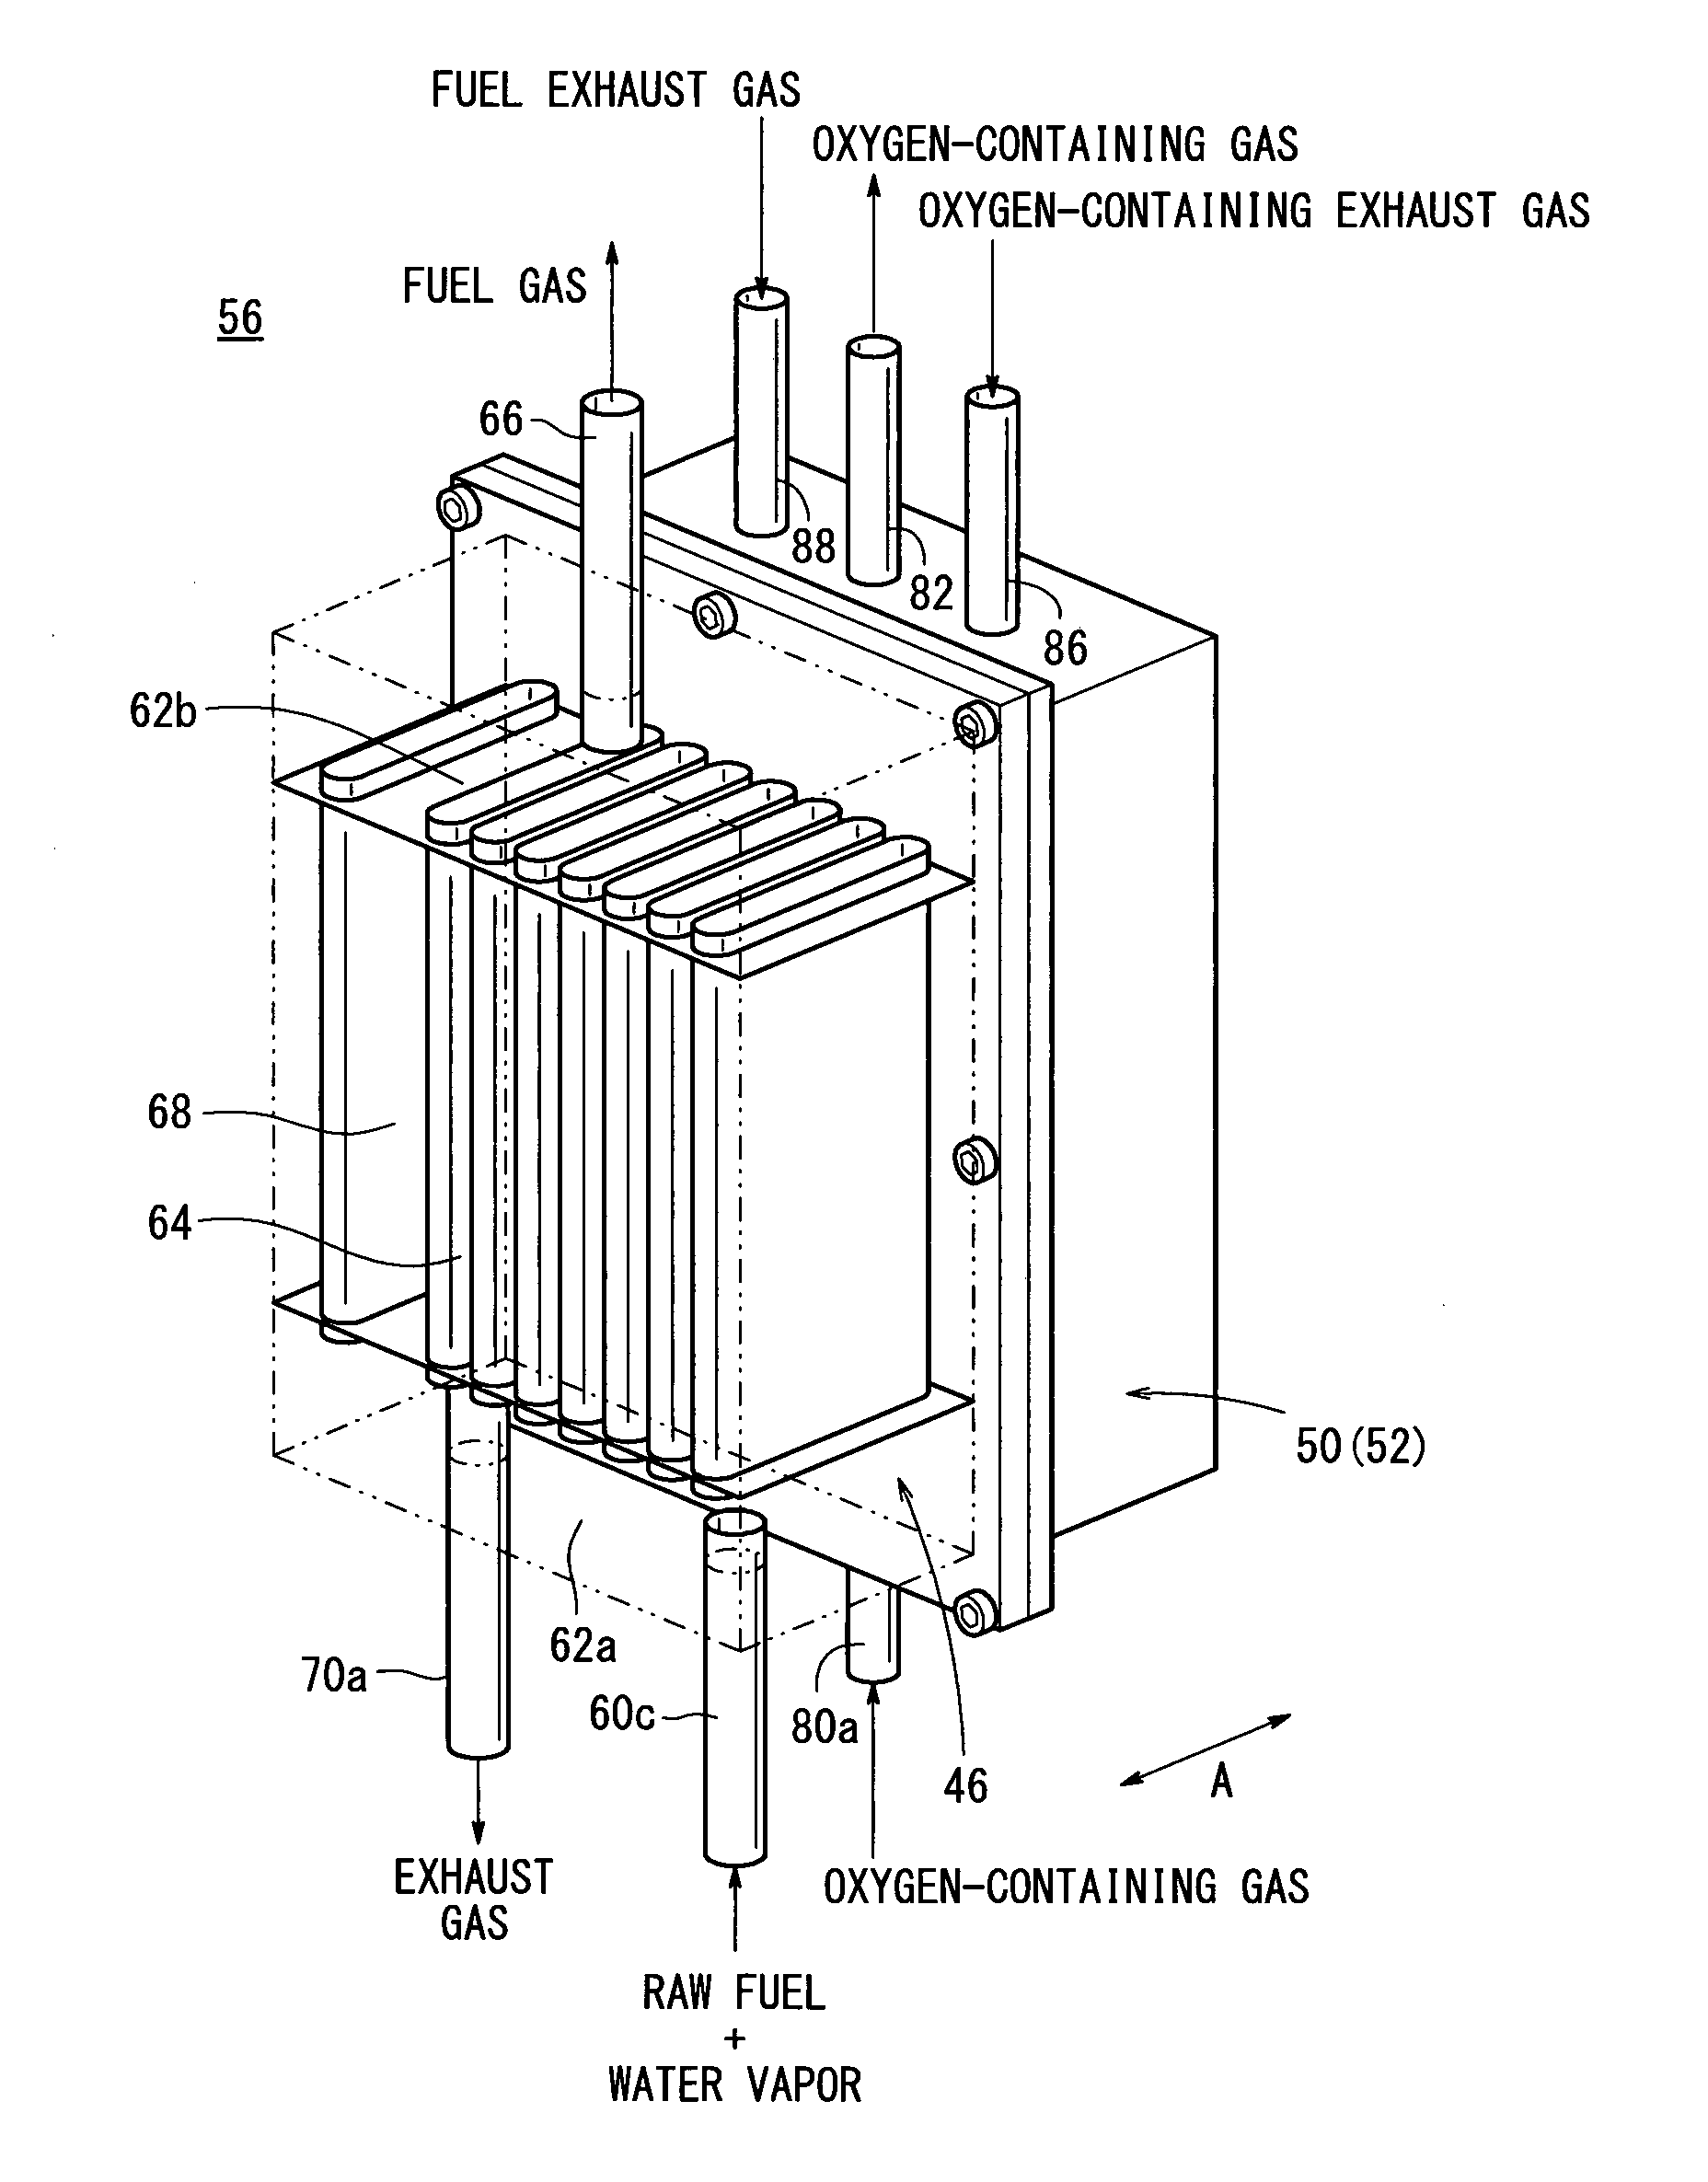 Fuel cell system